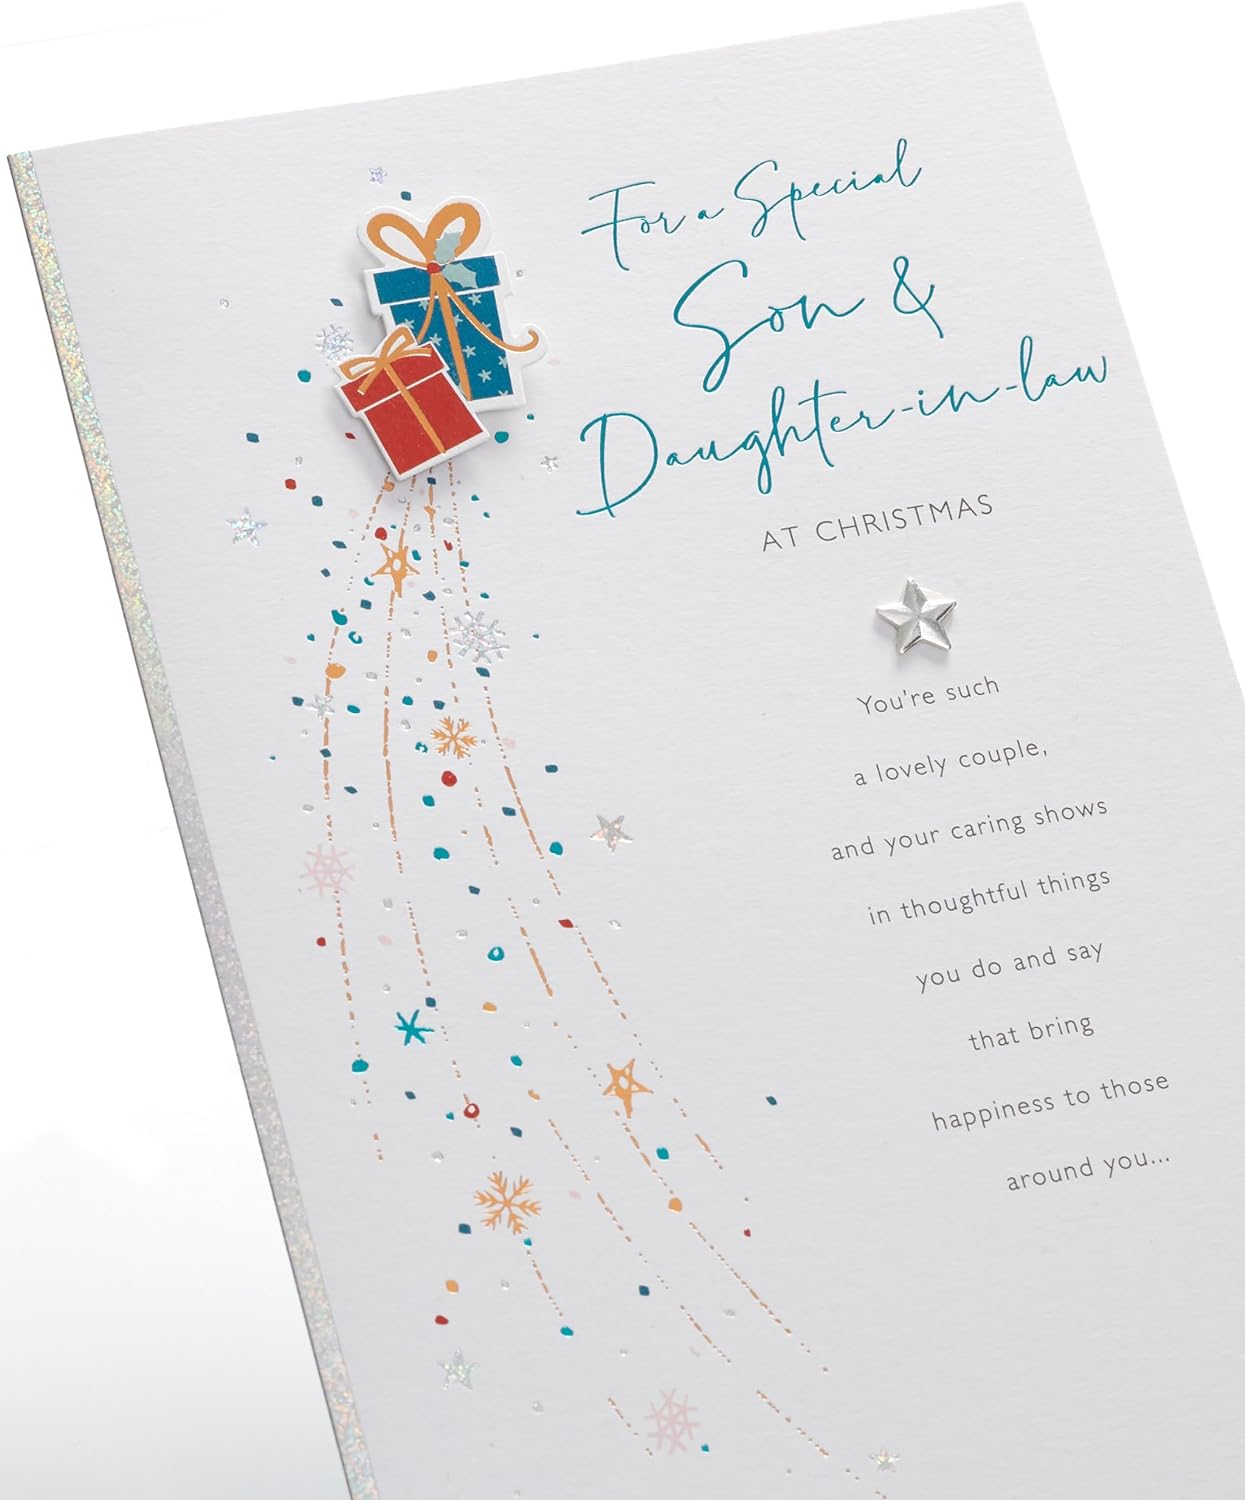 Son & Daughter-in-Law Christmas Card Lovely Presents Design 